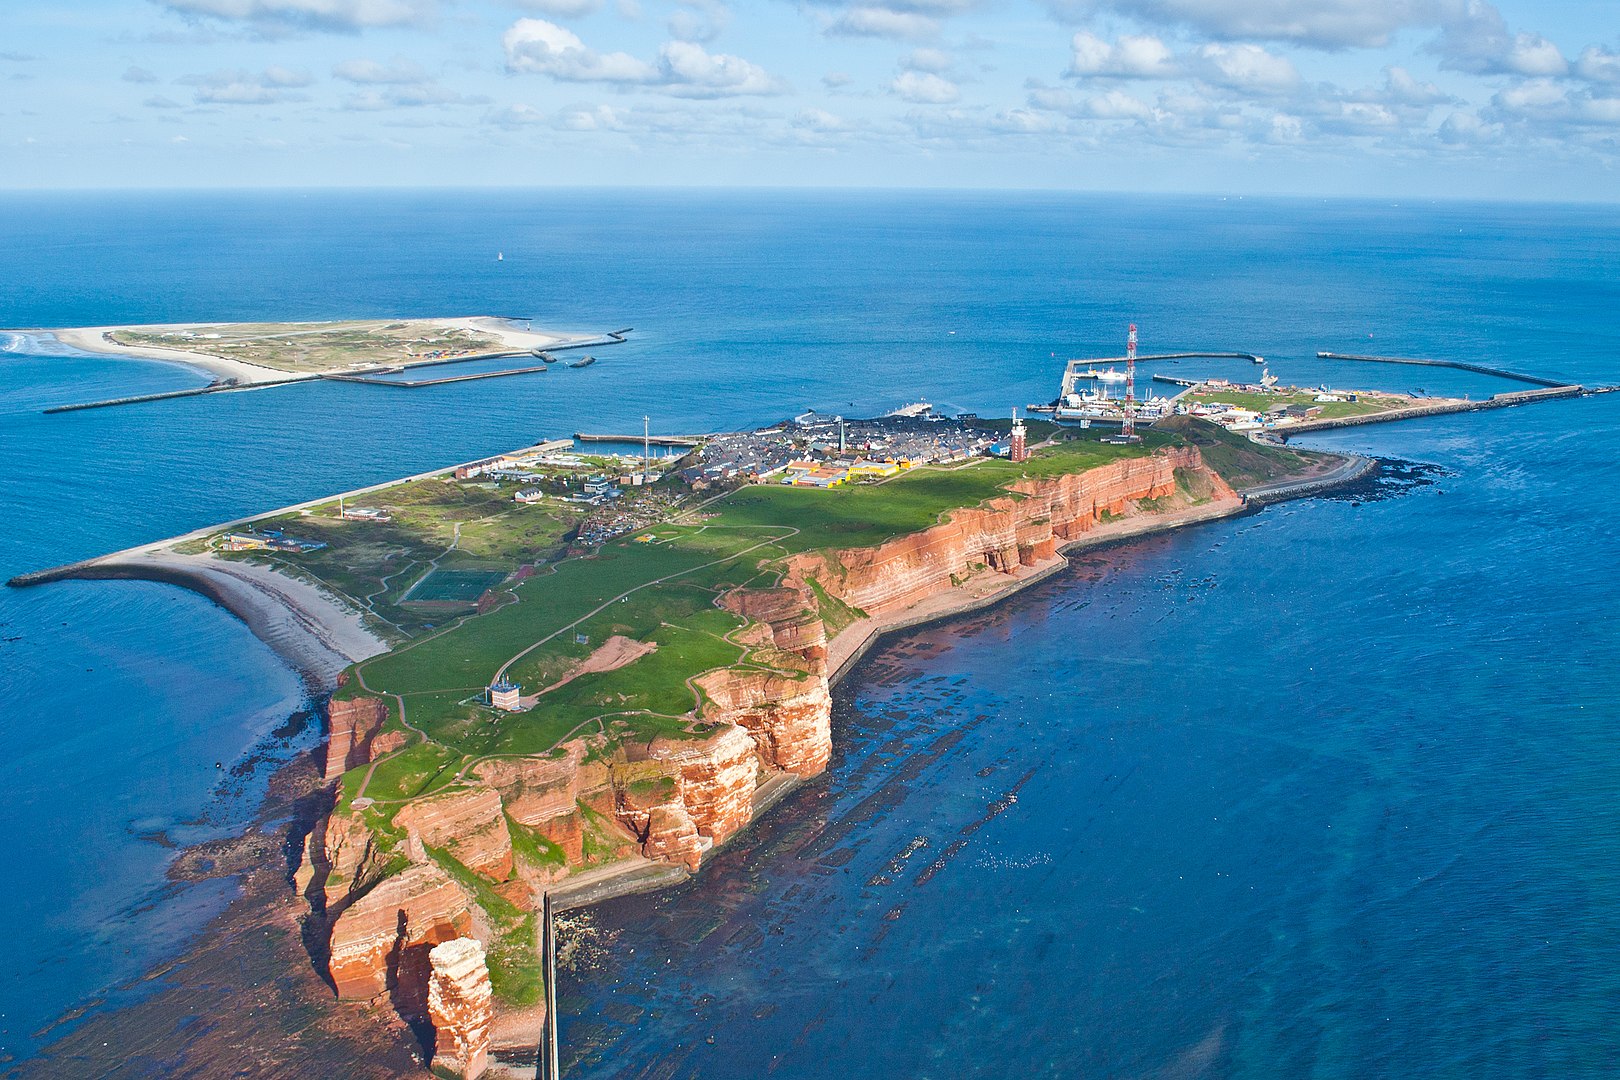 The red sandstone rock of Helgoland was pushed to the sea surface by a salt dome from the subsoil of the North Sea